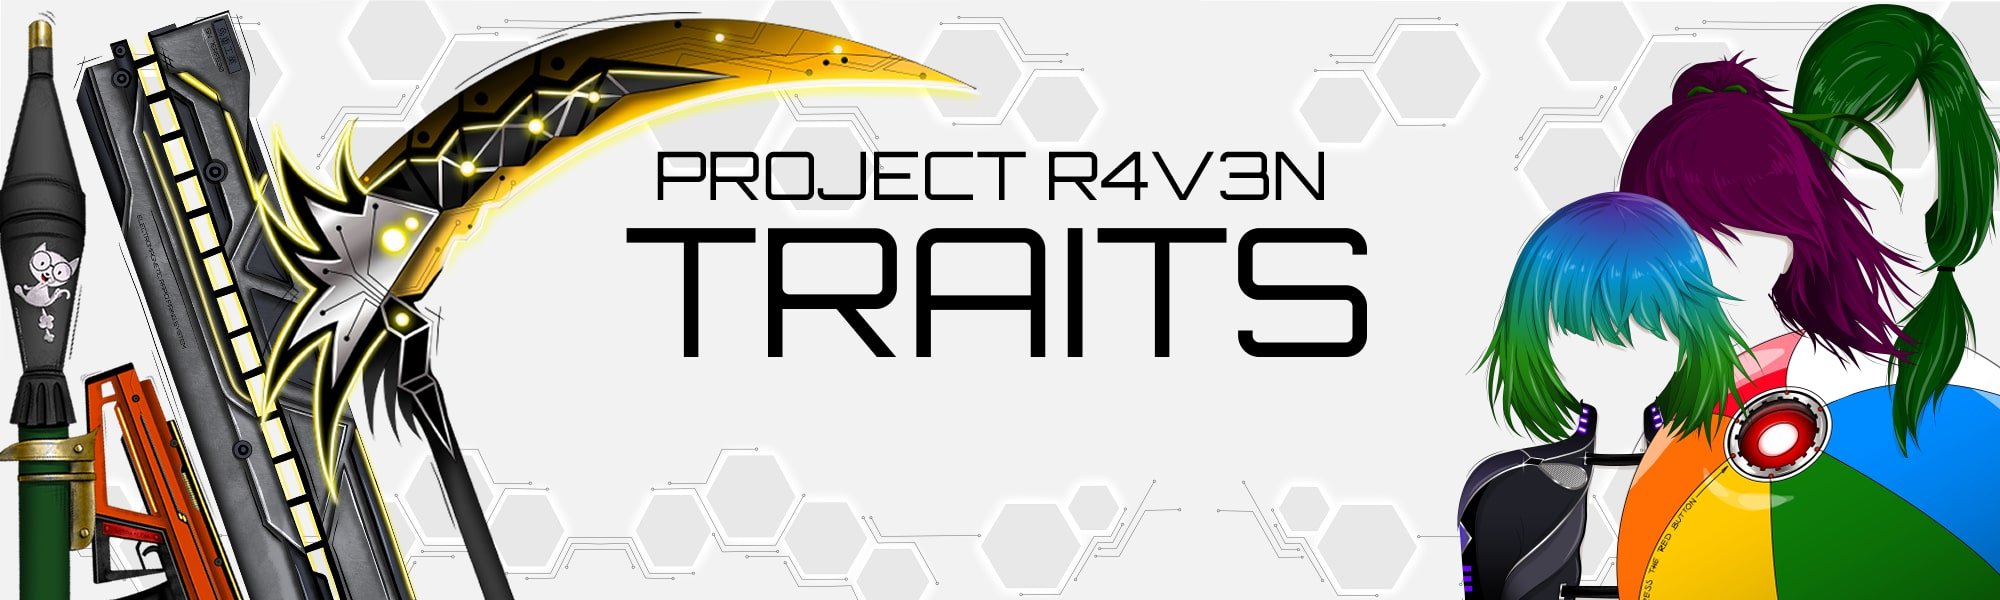 Project R4V3N Traits banner